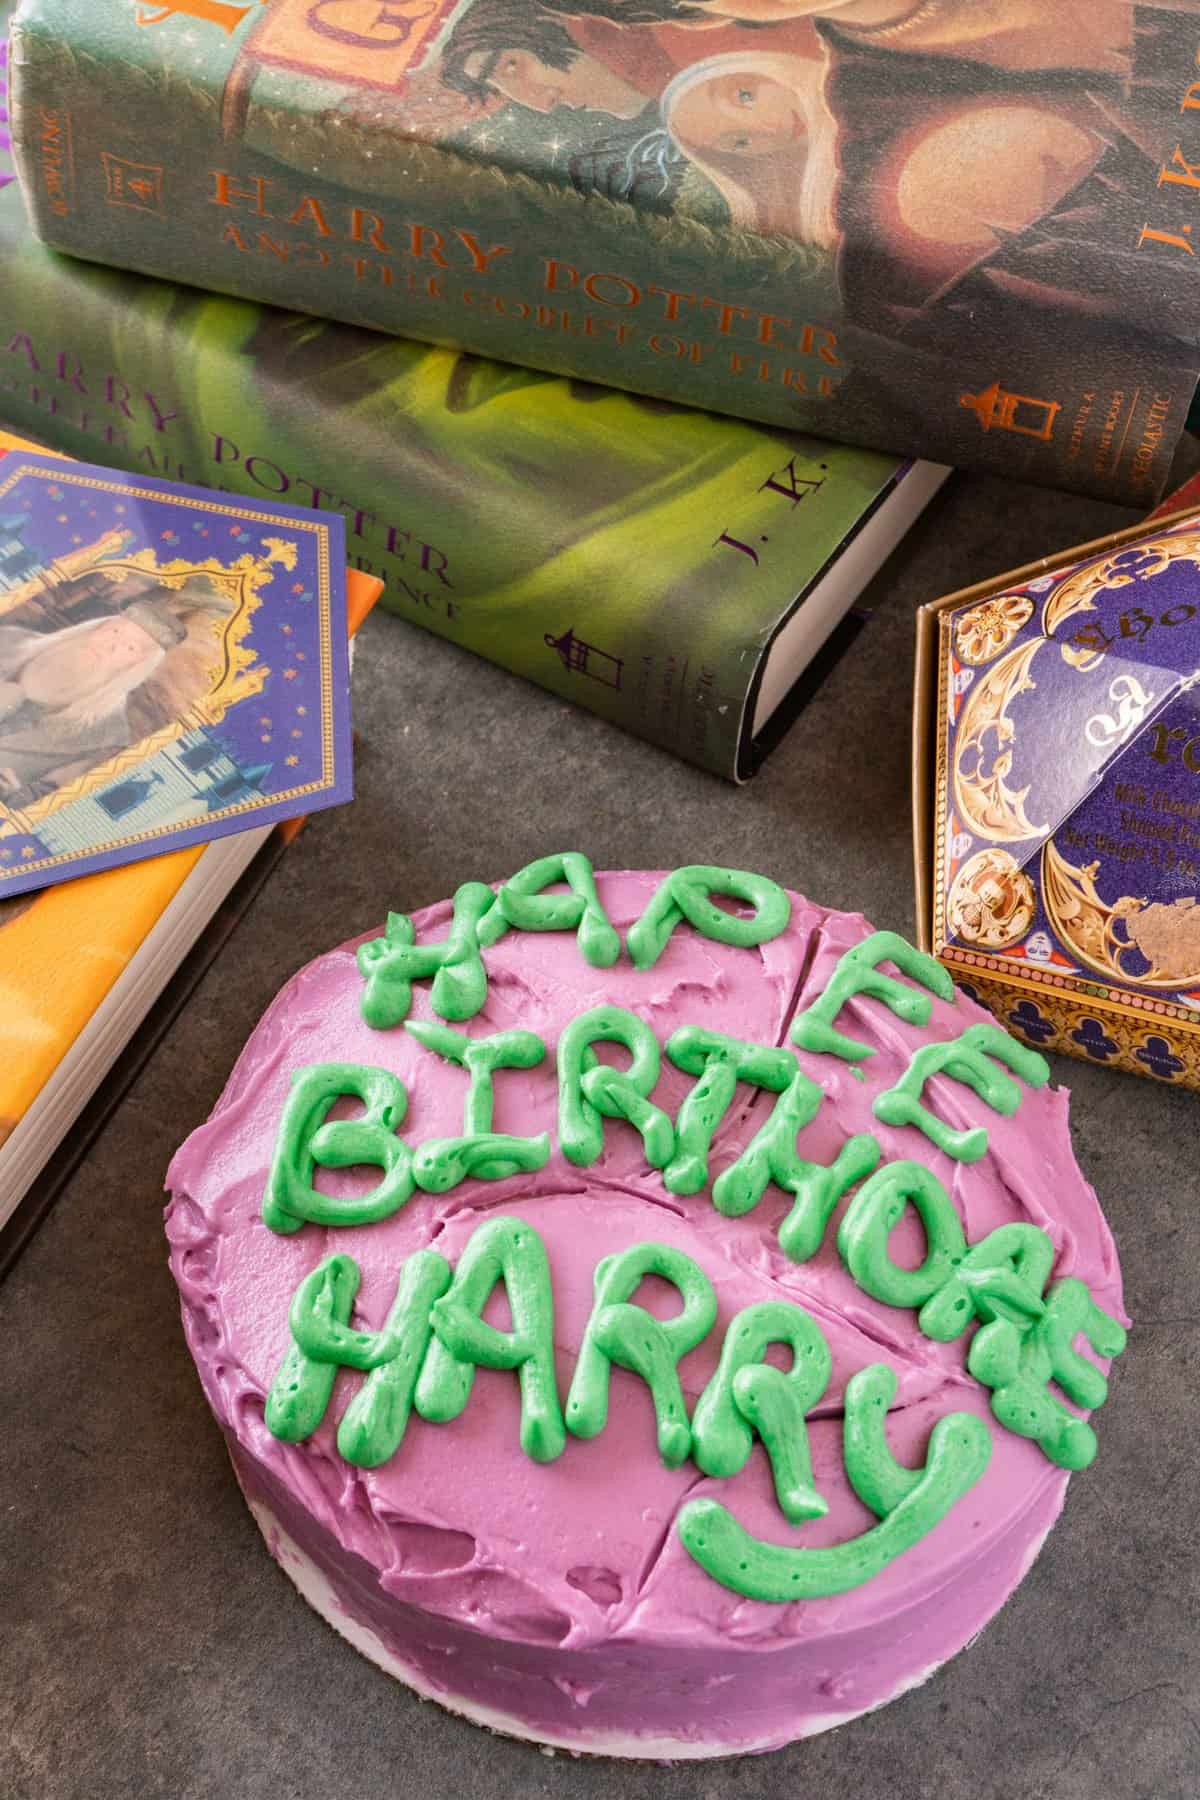 harry potter birthday cake with books nearby